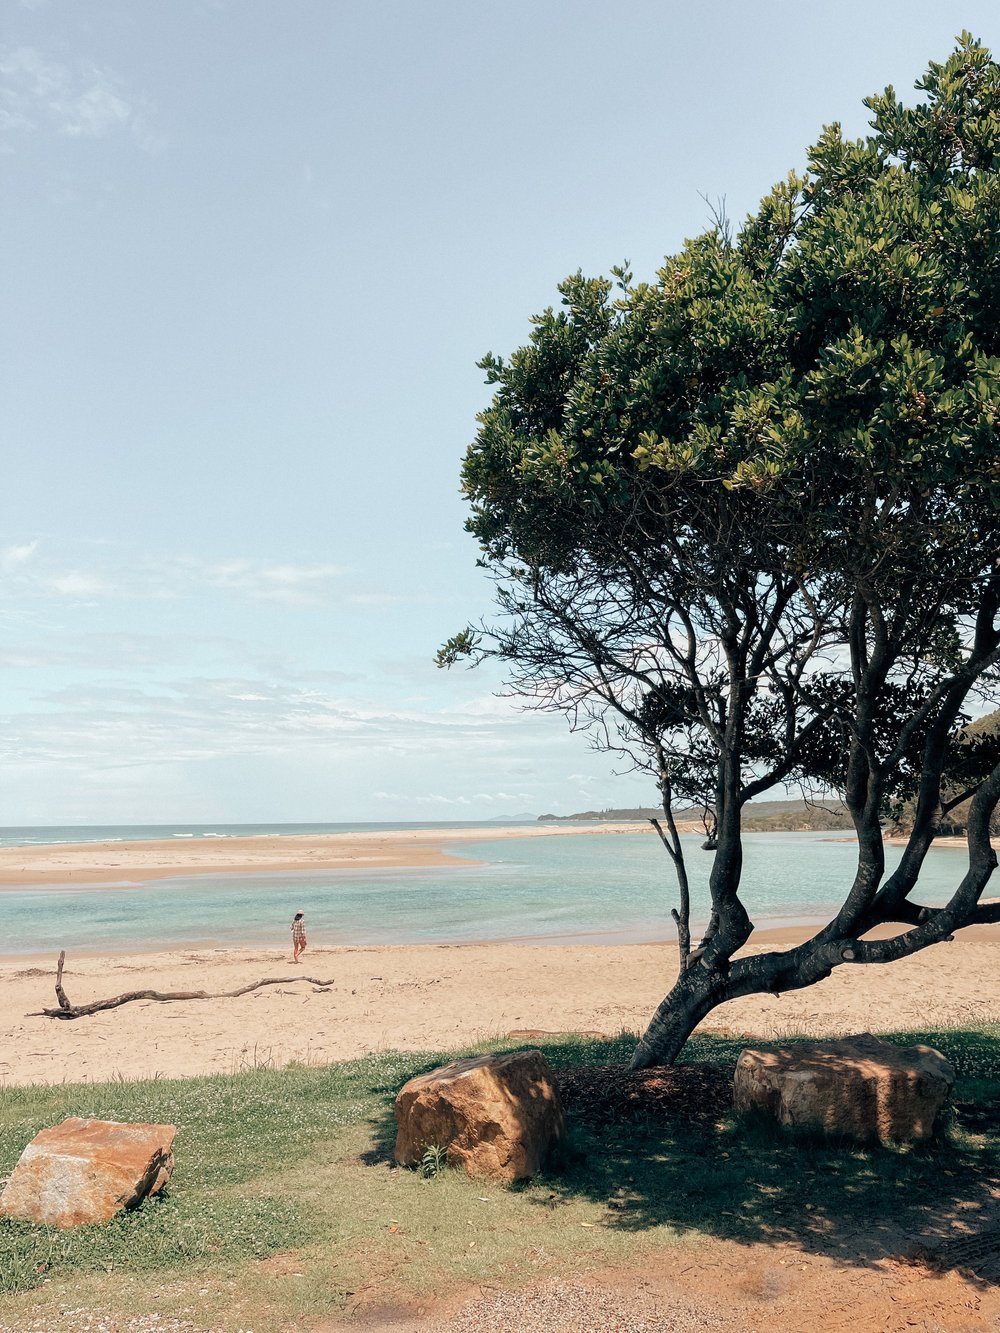 Tree with the beach in the background - Valla Beach - New South Wales (NSW) - Australia